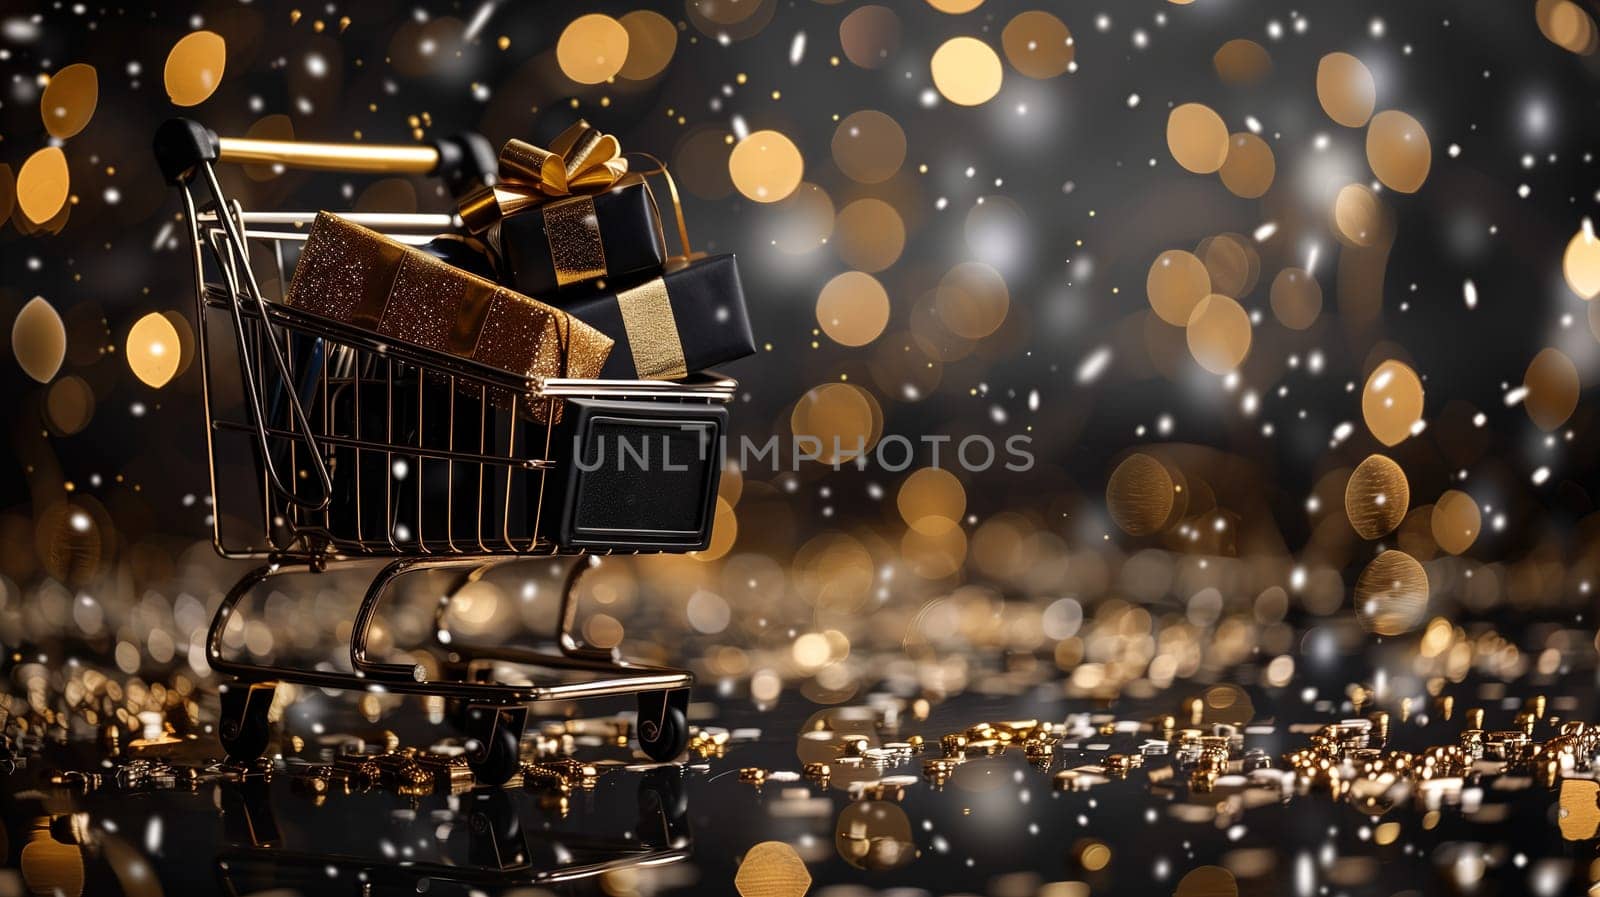 A shopping cart overflowing with presents sits atop a table, symbolizing the holiday season and the shopping frenzy of Black Friday. The cart is filled with wrapped gifts in various sizes and shapes.